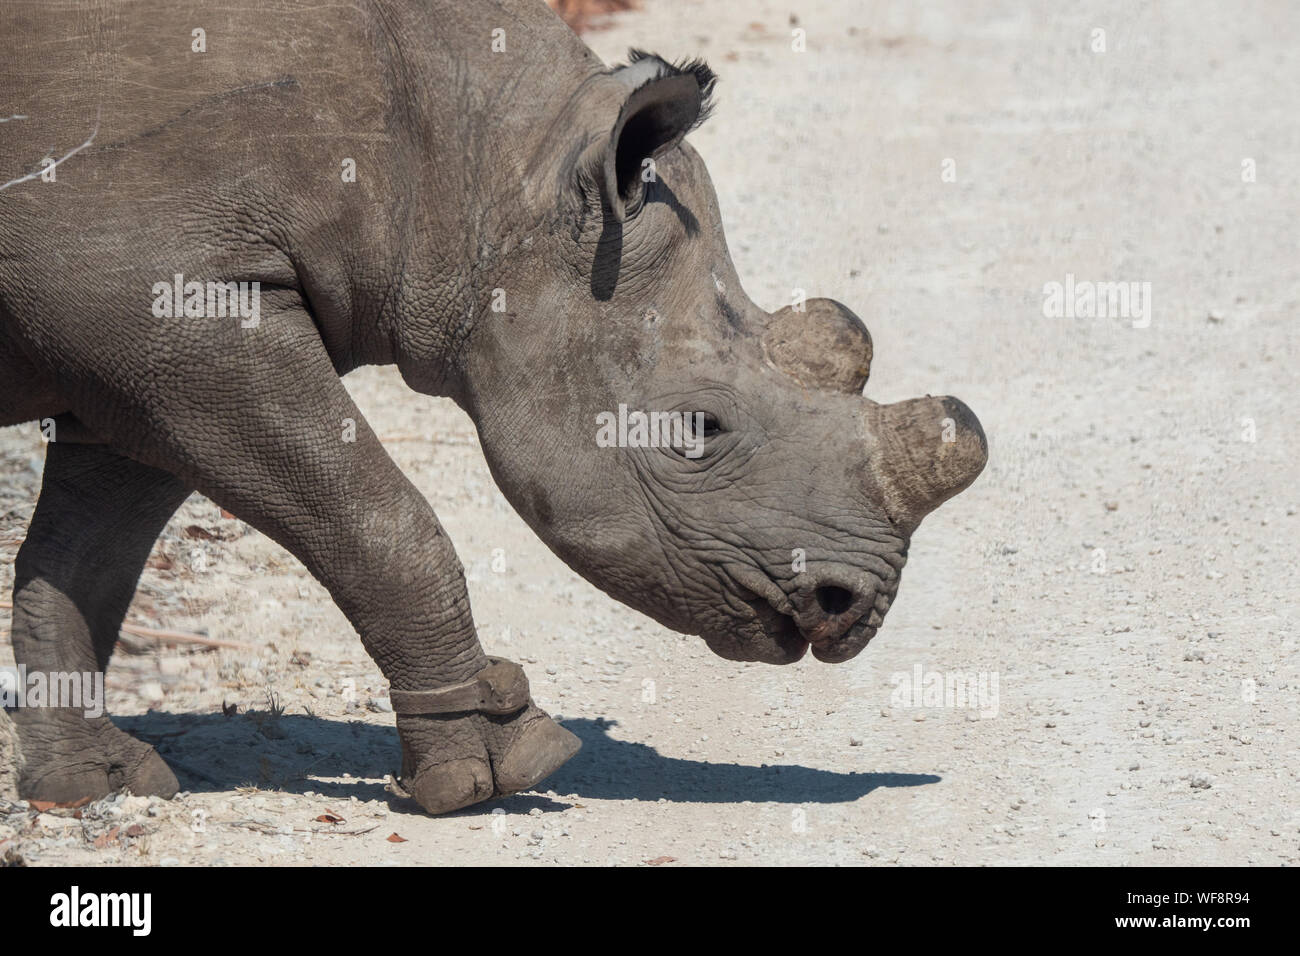 Dehorned Black or Hook-Lipped Rhino in Etosha National Park, Namibia as a Measure Against Poaching Stock Photo